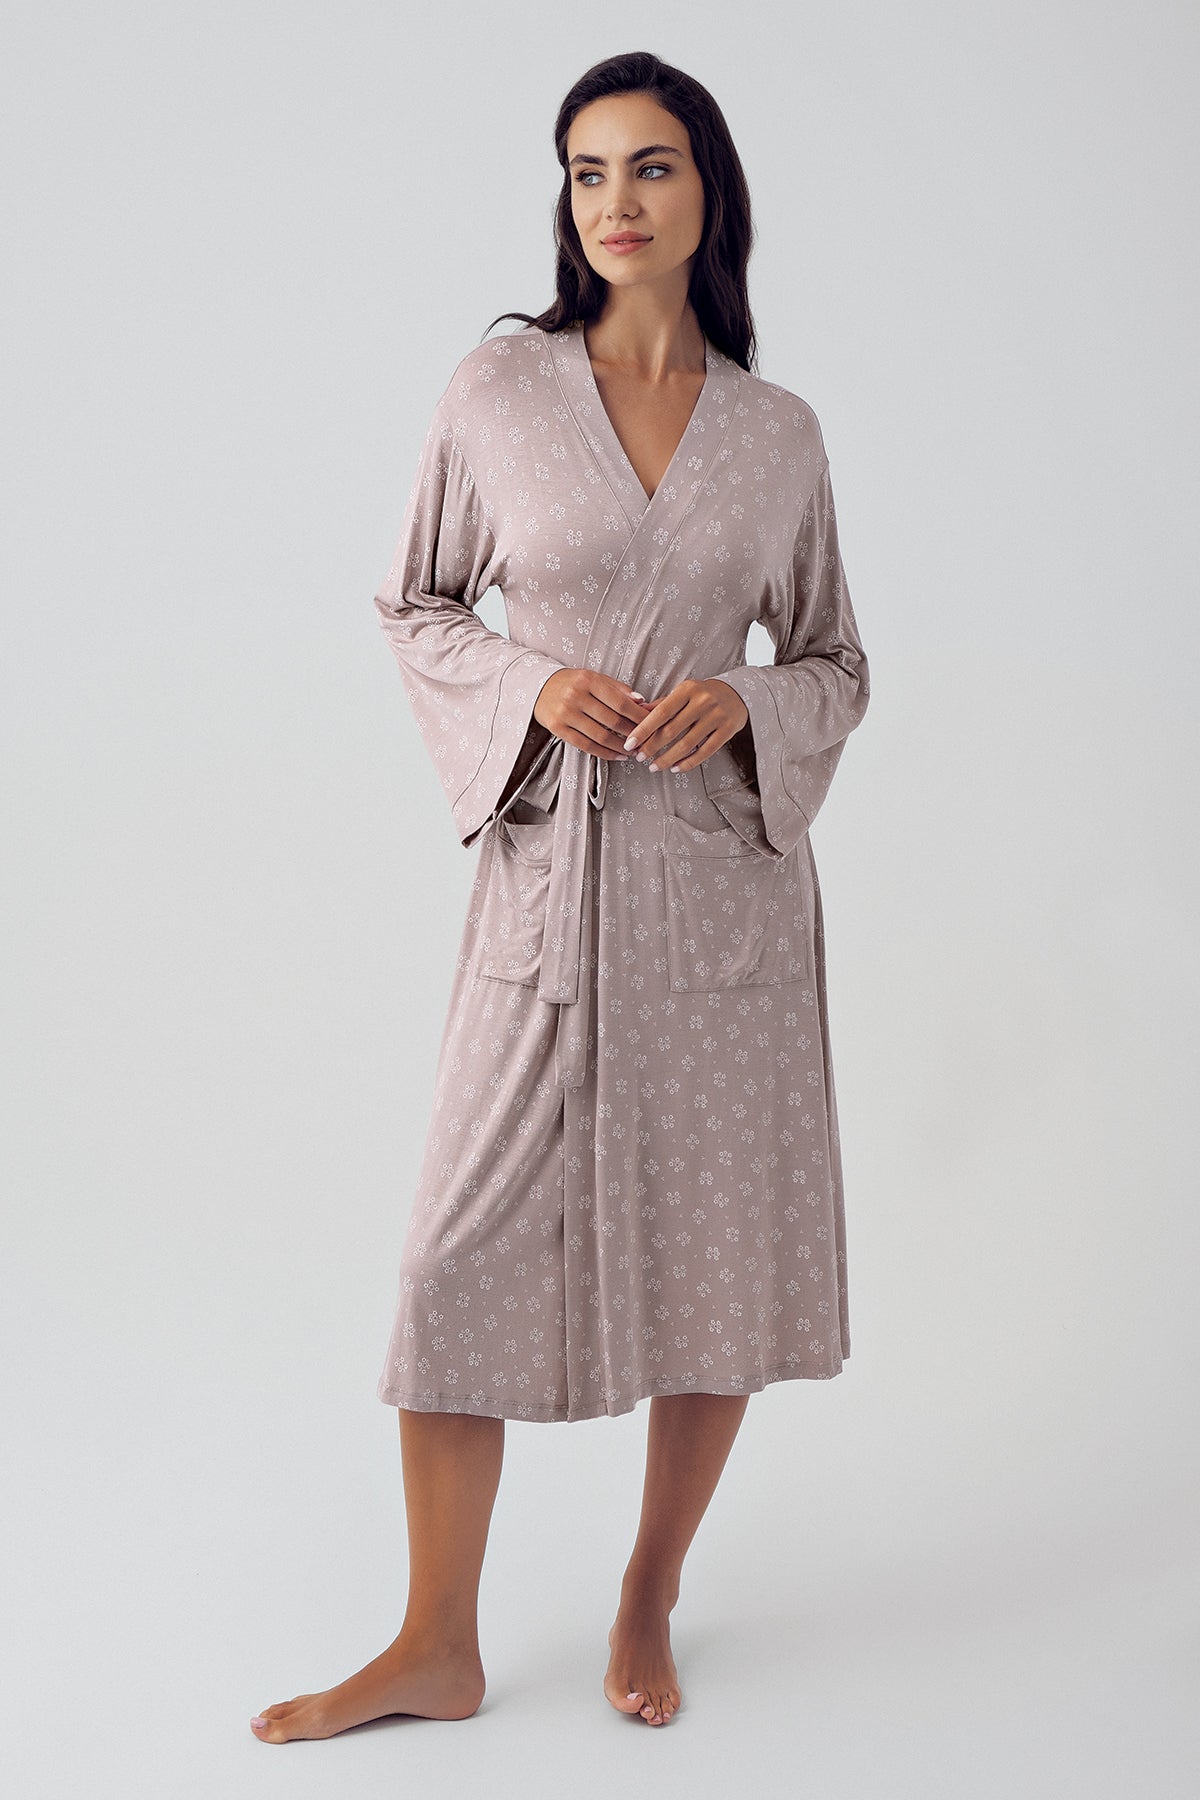 Shopymommy 15405 Cross Double Breasted Maternity & Nursing Nightgown With Patterned Robe Coffee